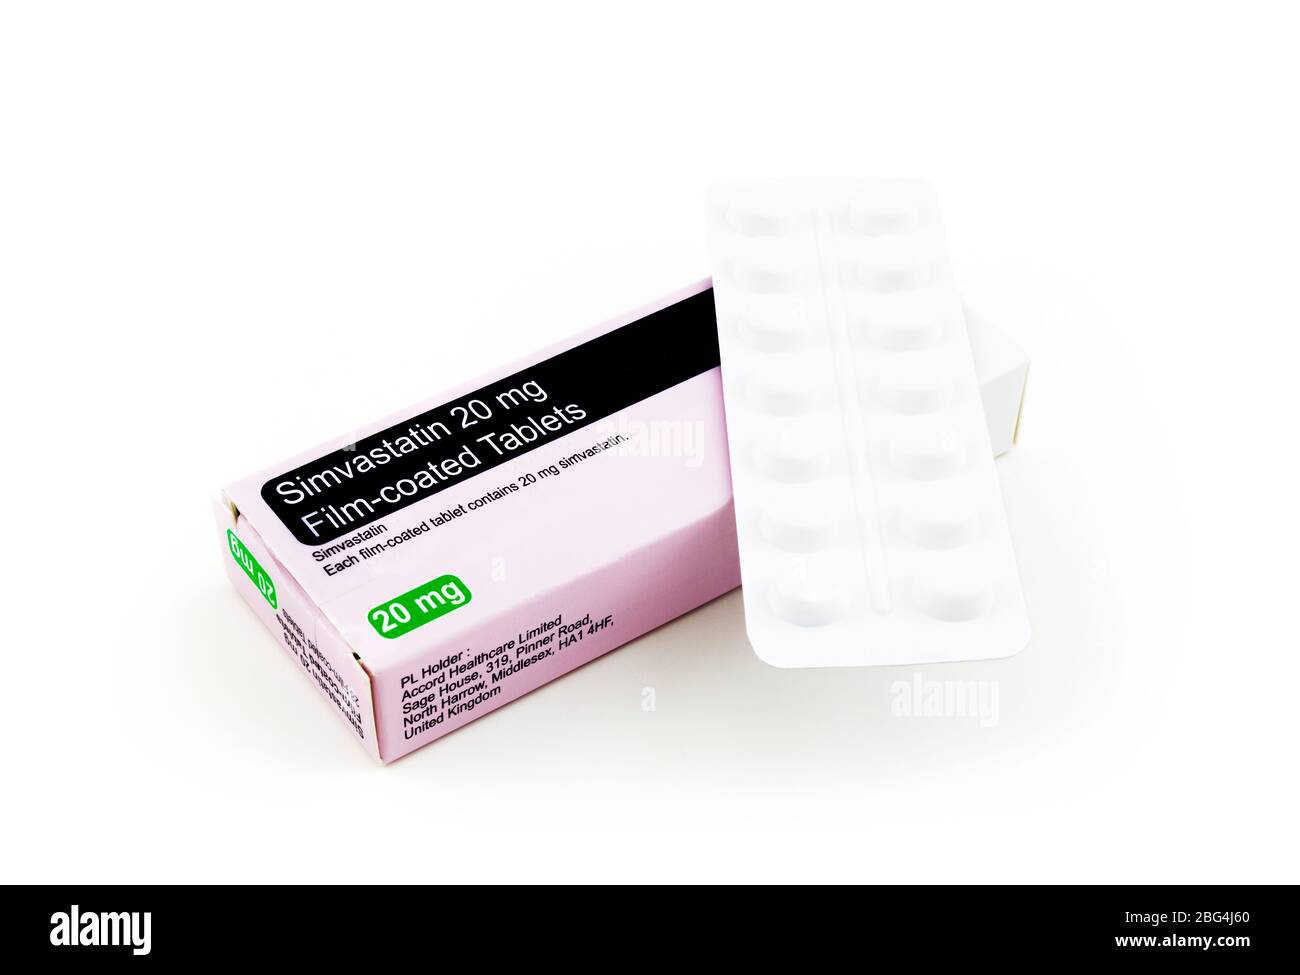 Statin tablets Simvastatin tablets simvastatin 20mg tablets for cholesterol reduction Stock Photo